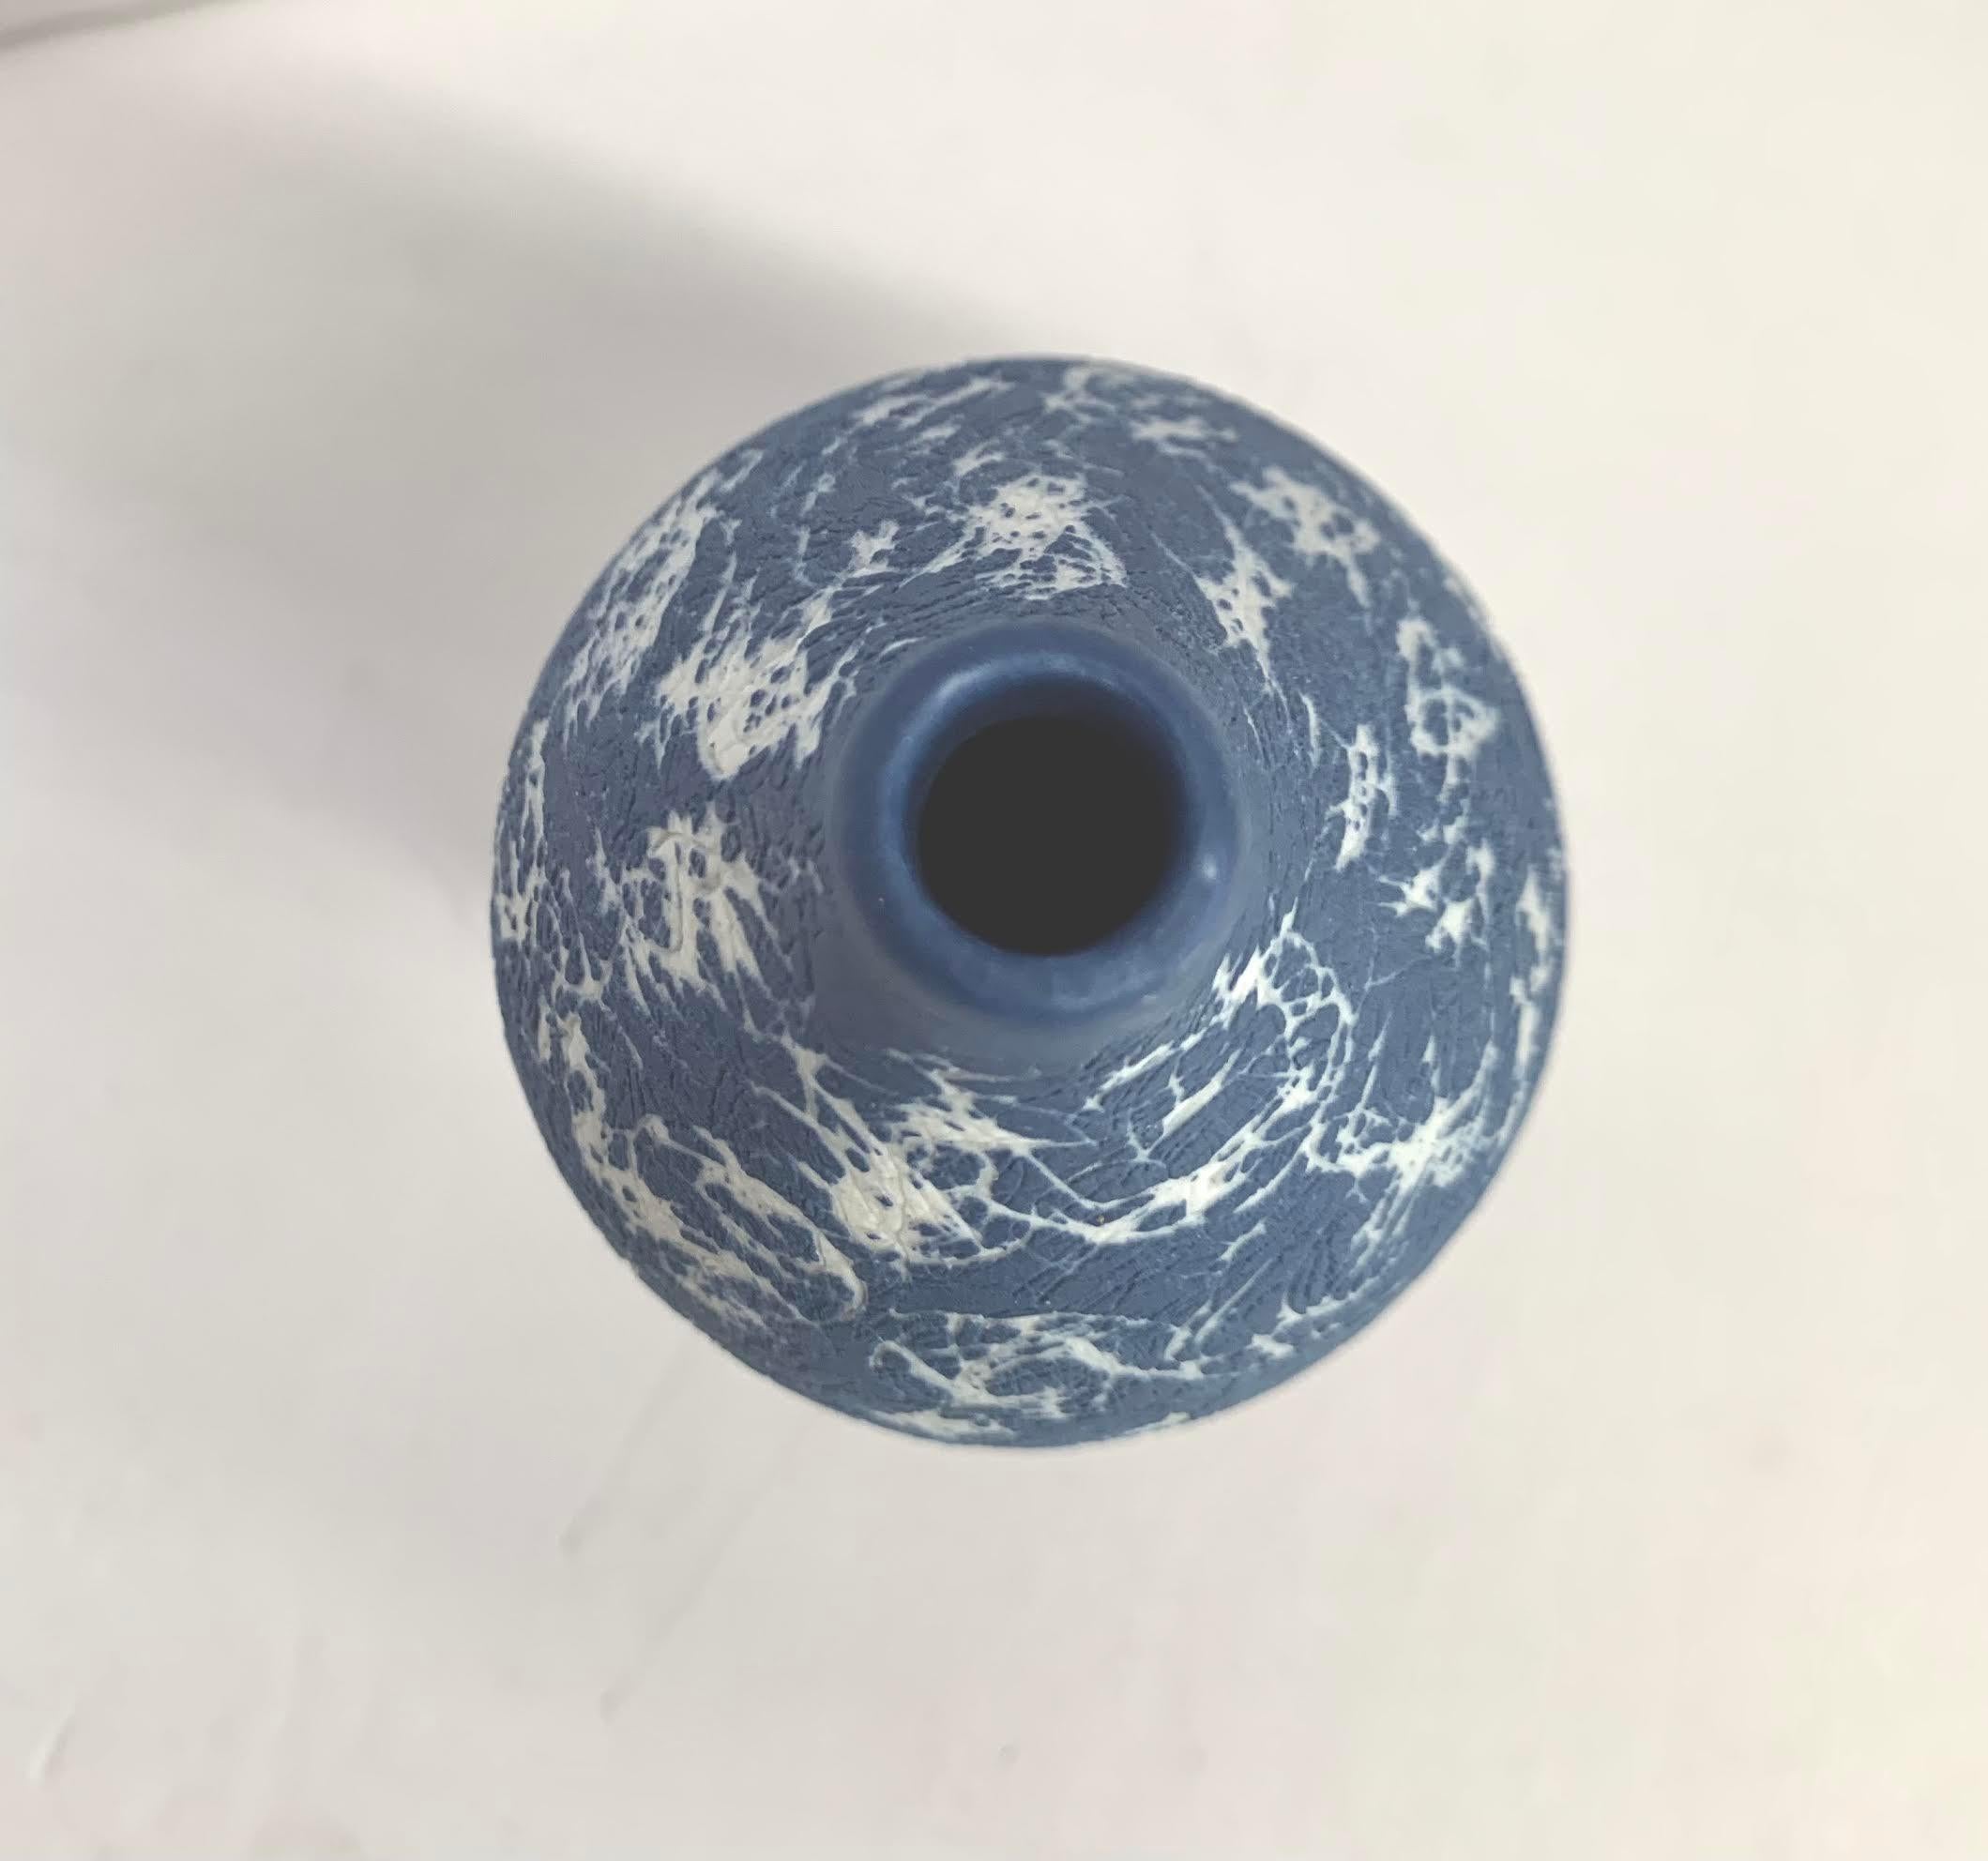 Contemporary Italian hand made ceramic blue graffiti design vase.
The matte glaze has a slight texture.
Part of a large collection of blue and white diminutive vases.
See image #4.